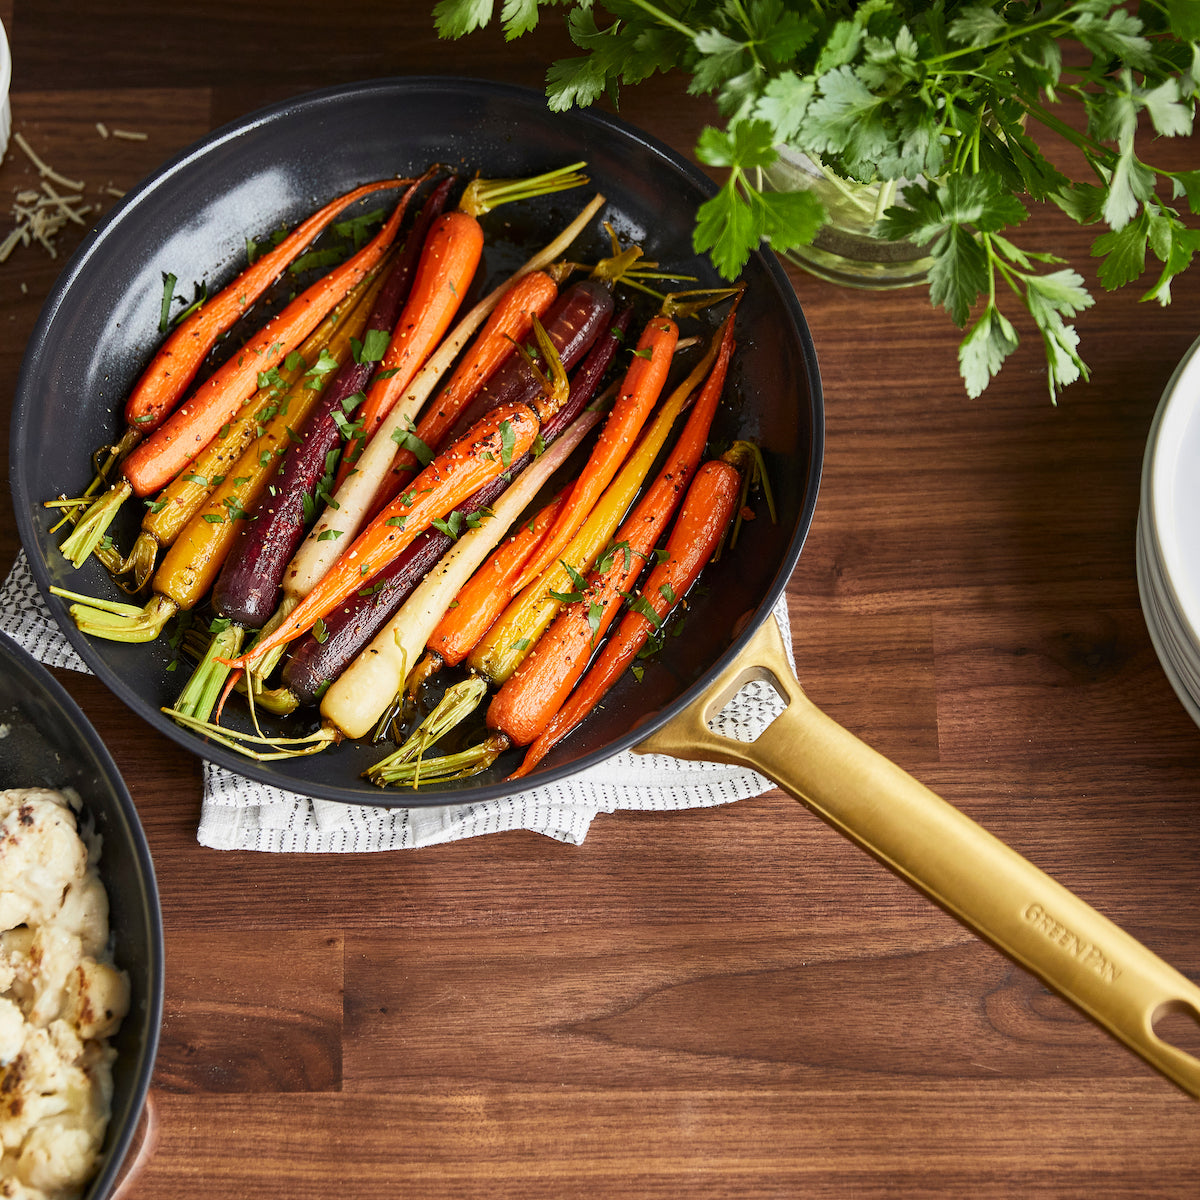 GreenPan Reserve Healthy Ceramic Nonstick 12 Fry Pan with Lid - Twilight